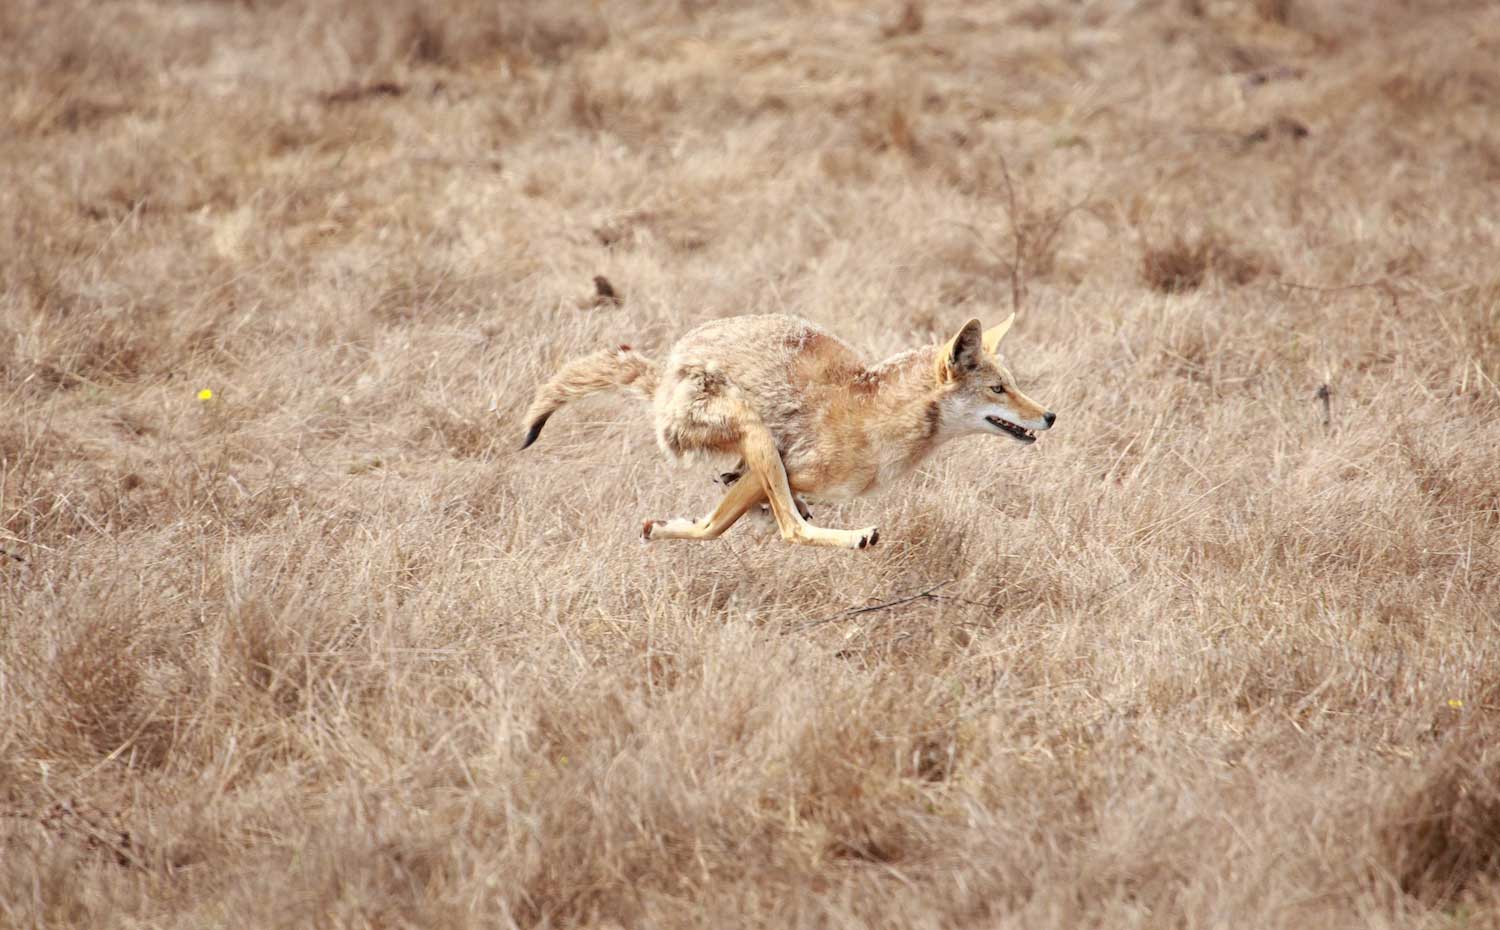 A coyote running through dried grasses.